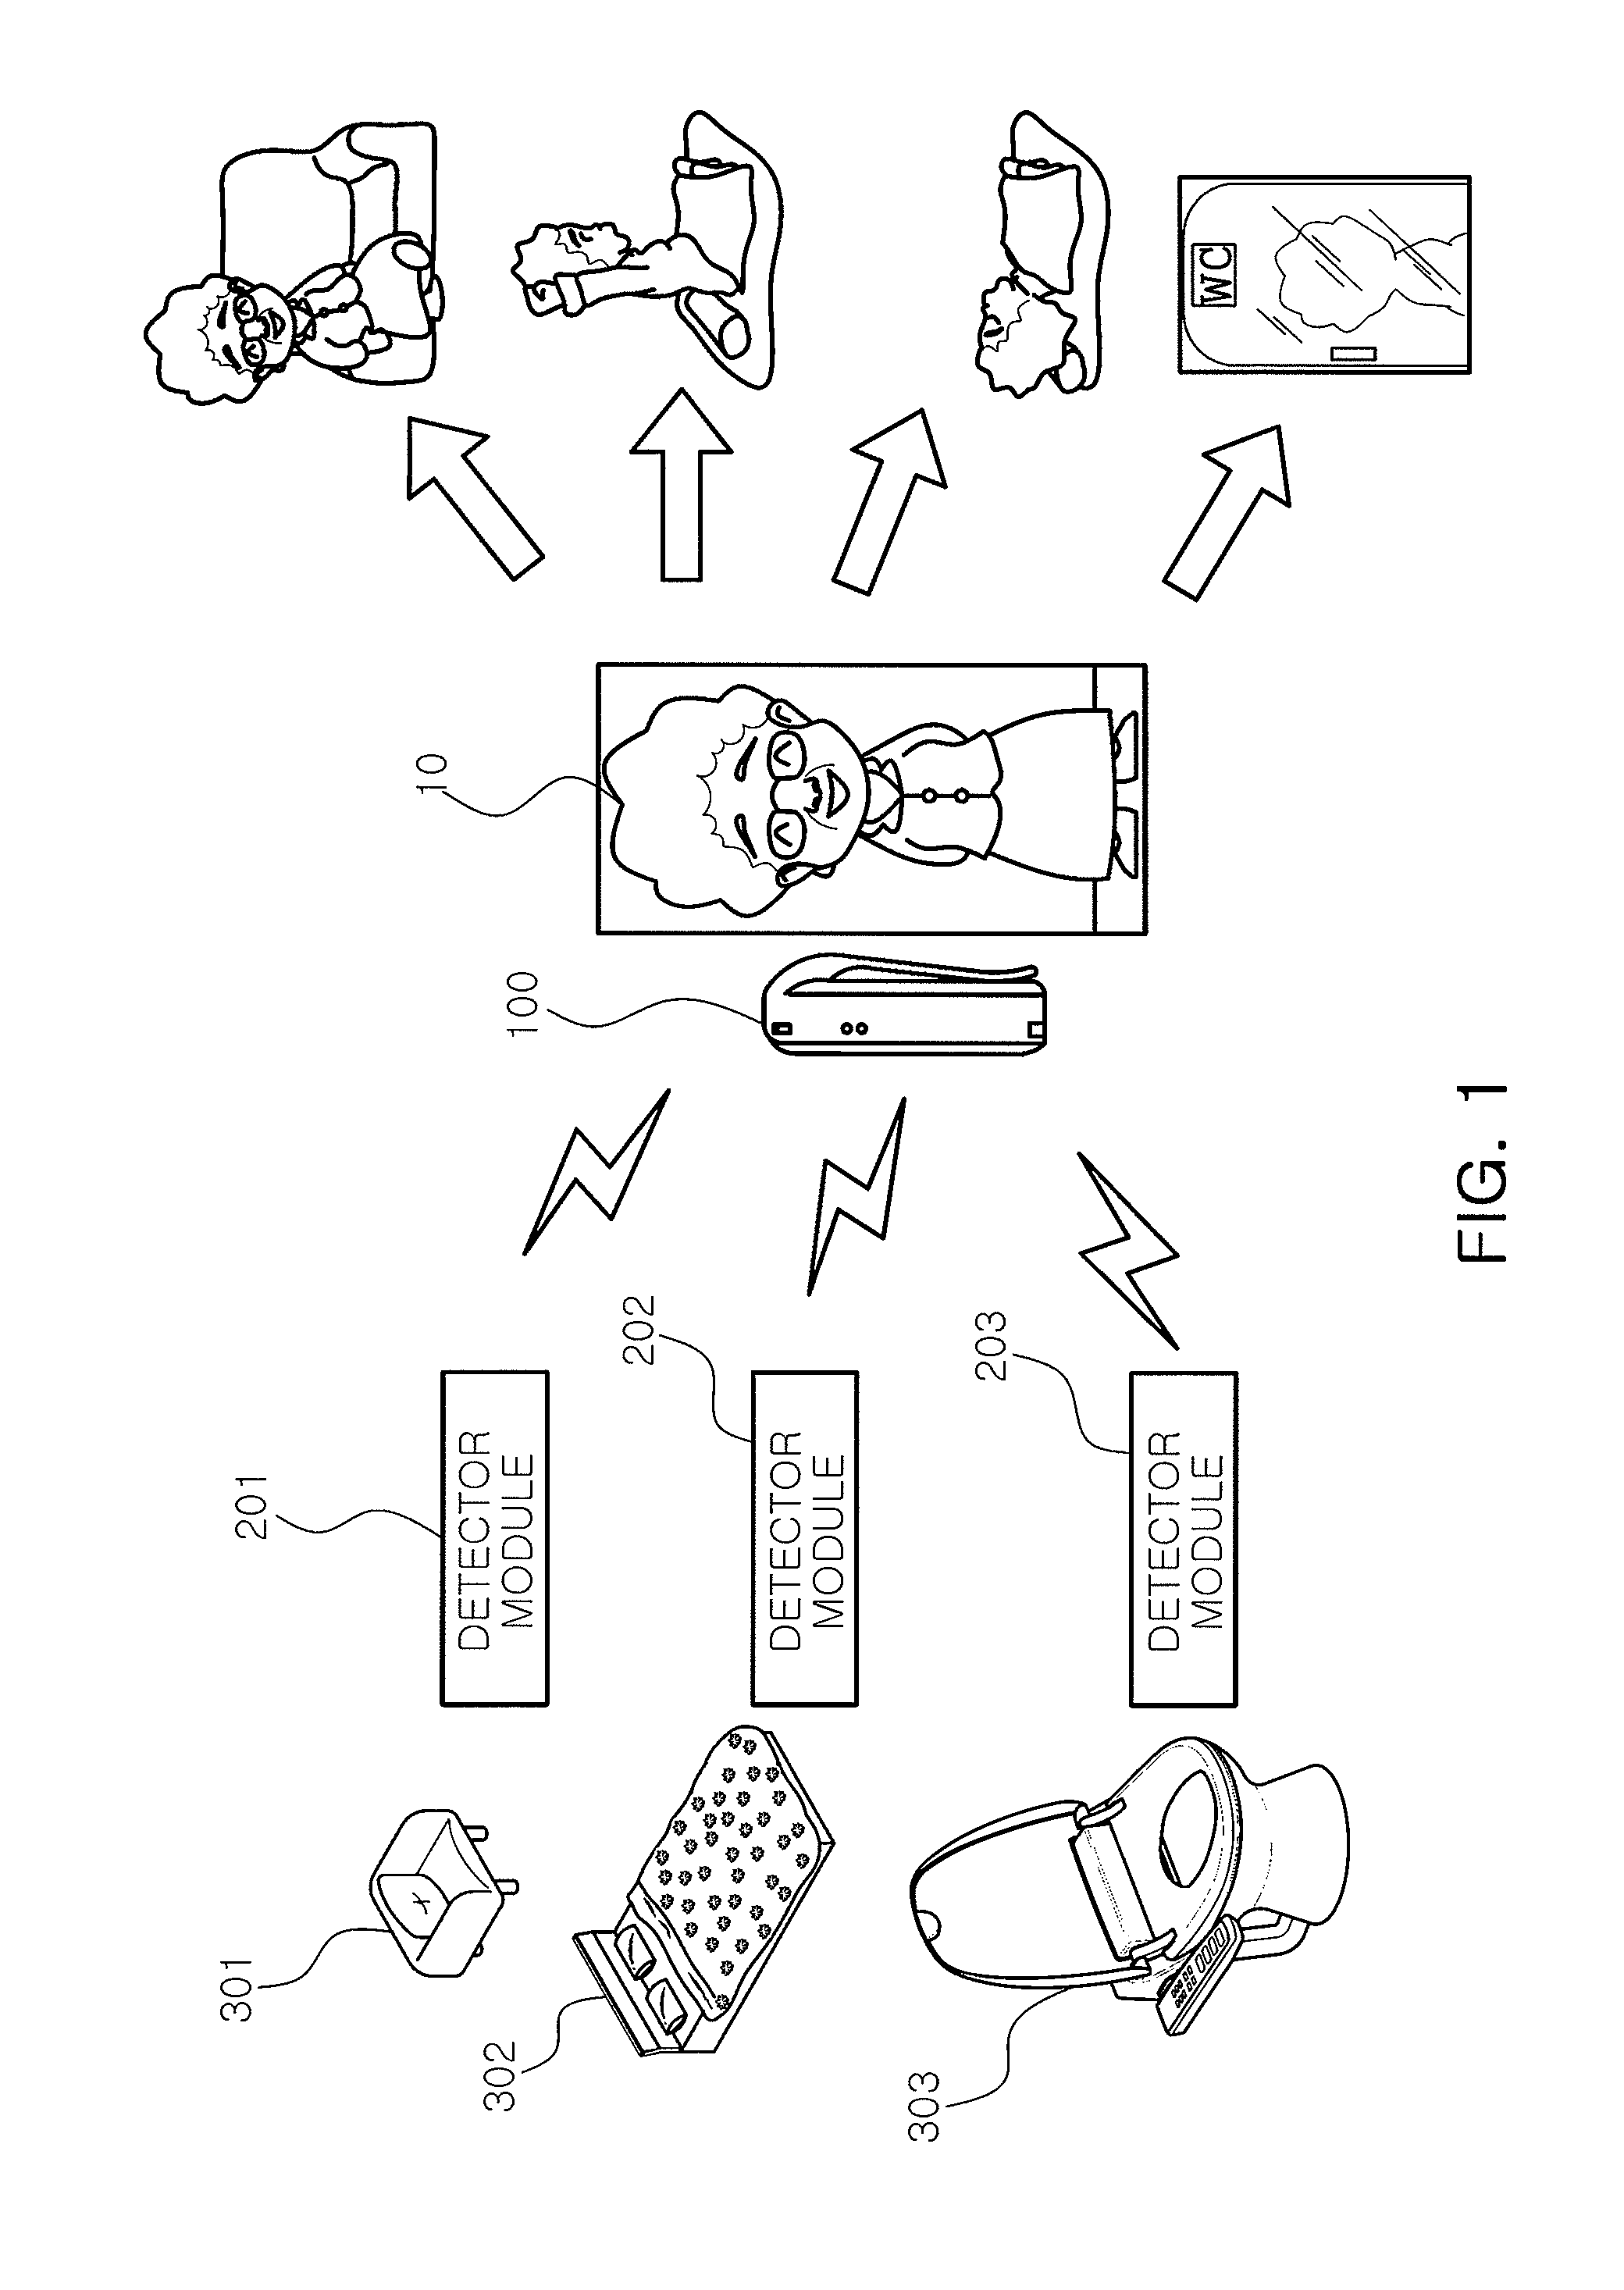 Hand-held device for detecting activities of daily living and system having the same